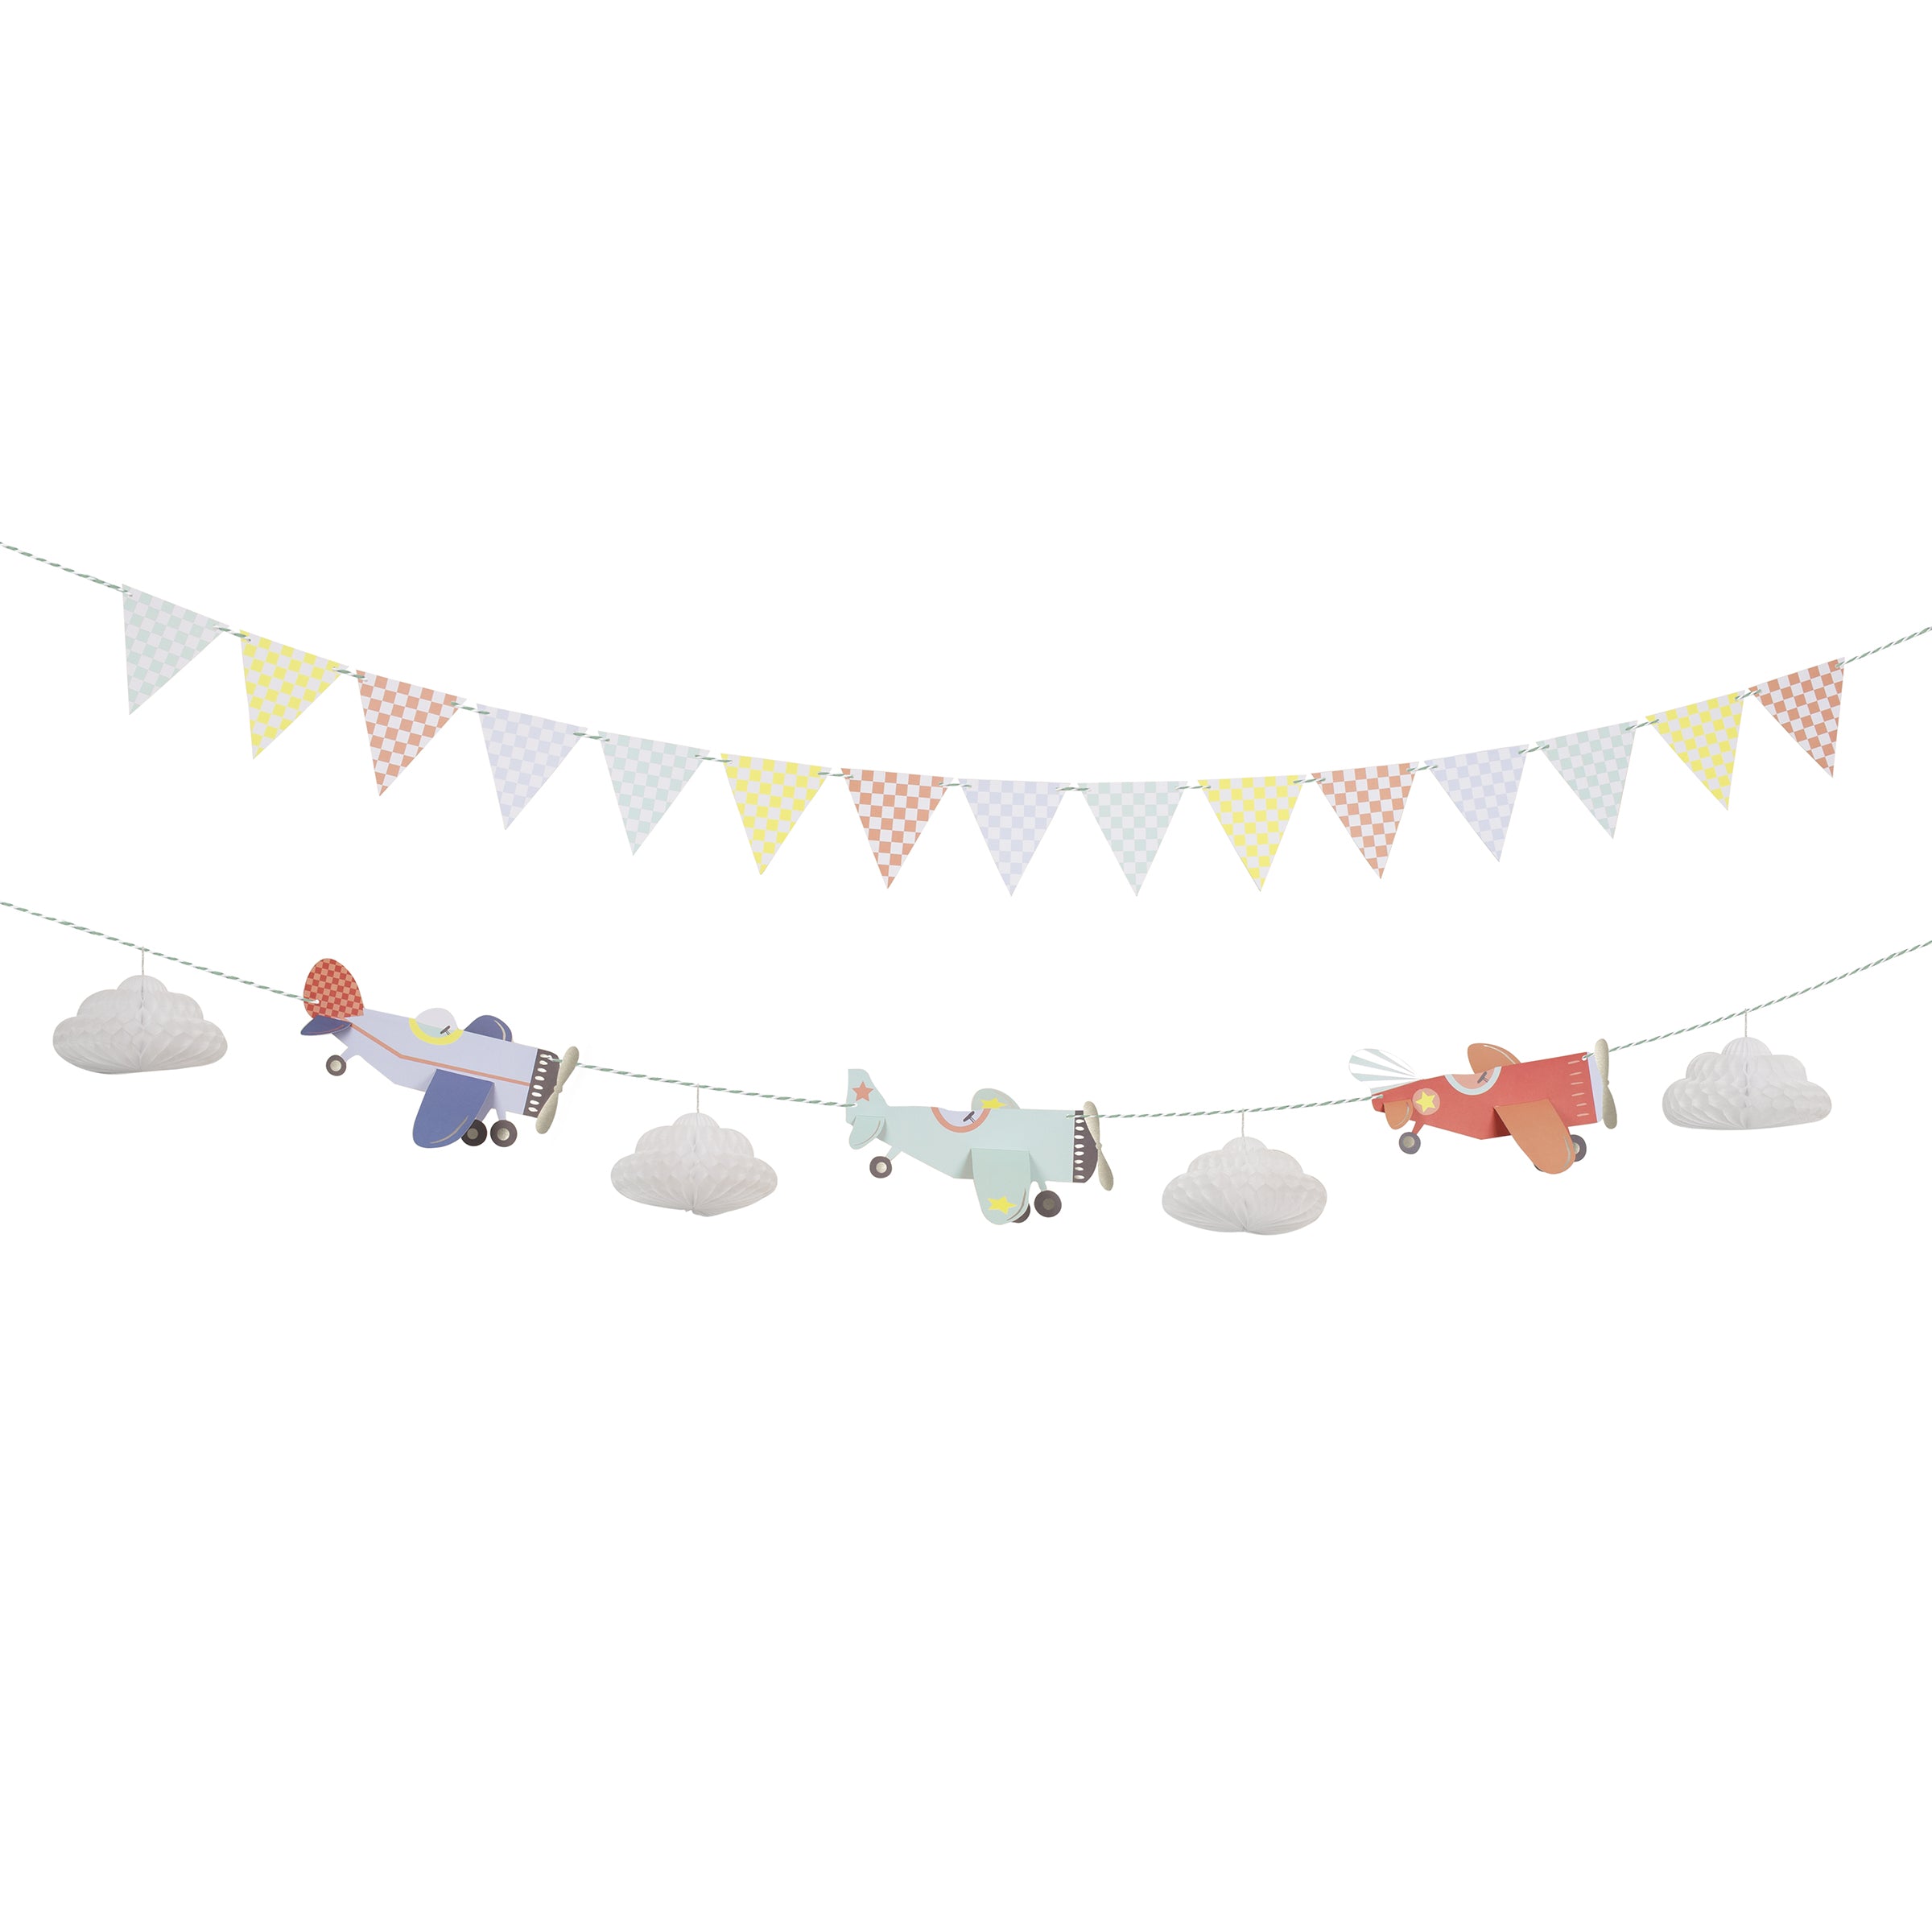 Our paper garland features 3D plans, clouds and checked pennants, ideal for an airplane birthday party.